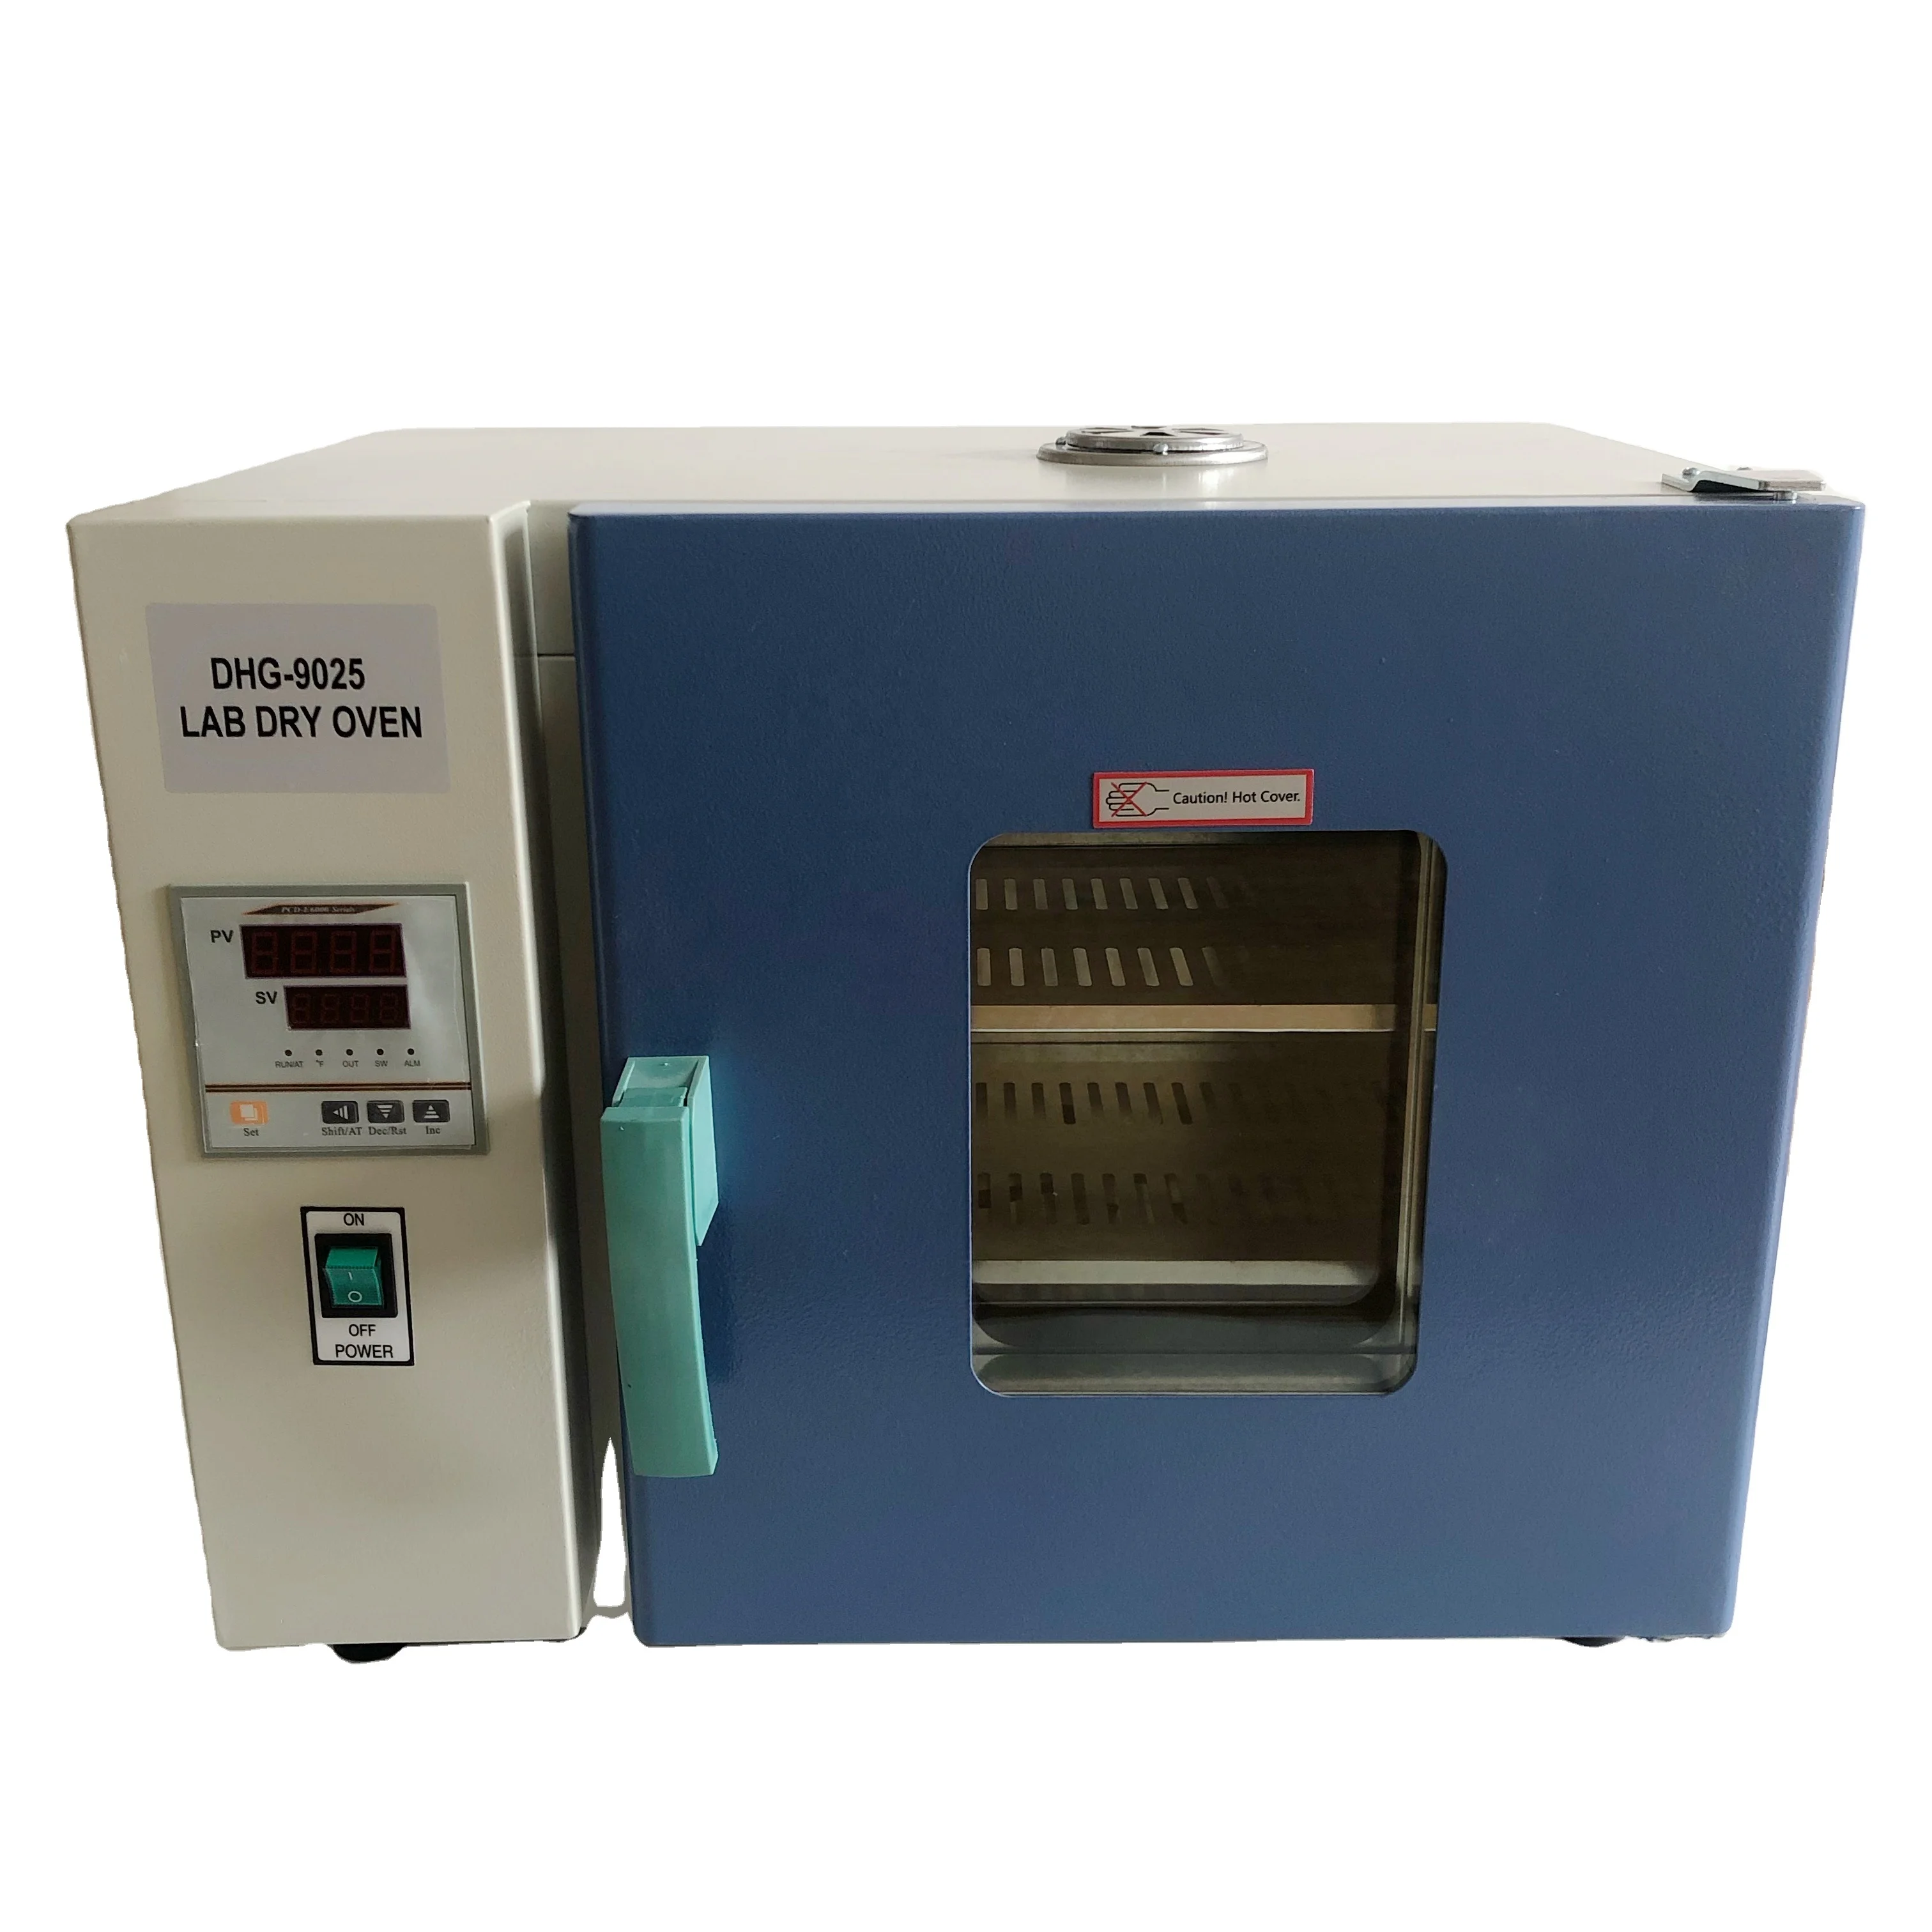 300 Degree High Temperature Drying Oven Supply